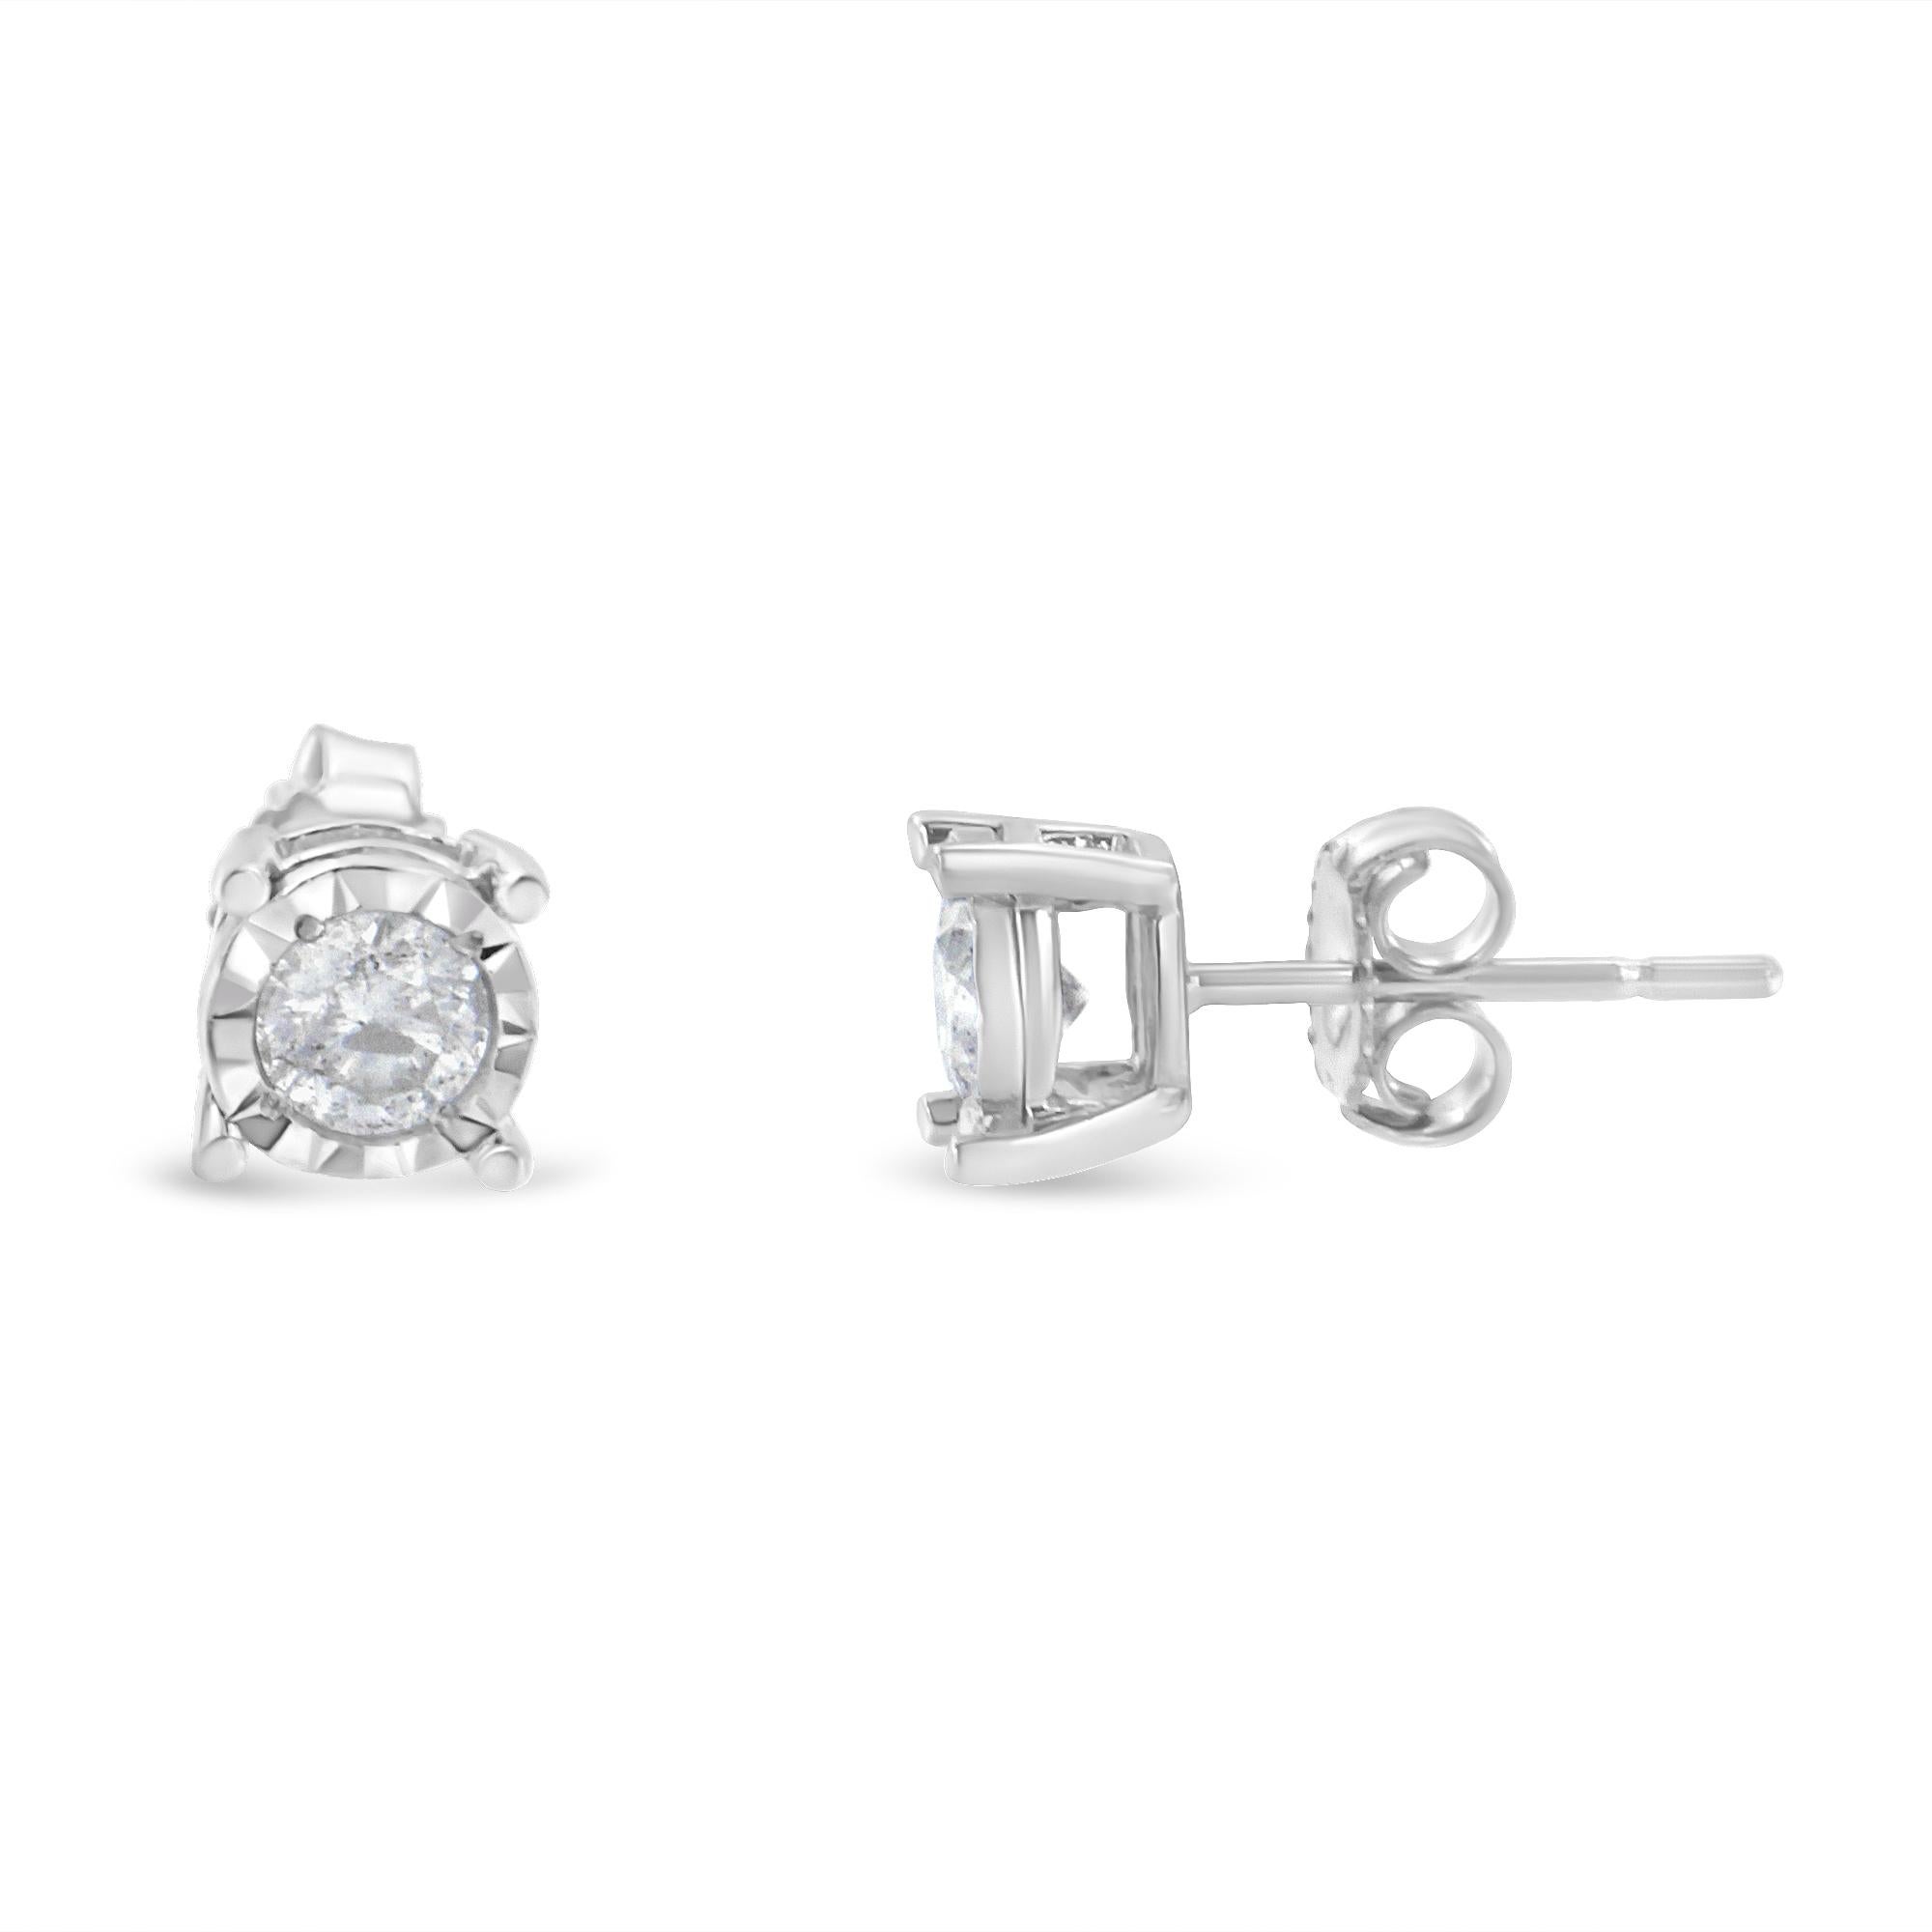 Precious and delicate, these .925 sterling silver stud earrings hold 1/2 a carat TDW of twinkling diamonds. The diamonds are secured in a miracle setting which makes them look larger and adds sparkle. A great piece for everyday wear that secures